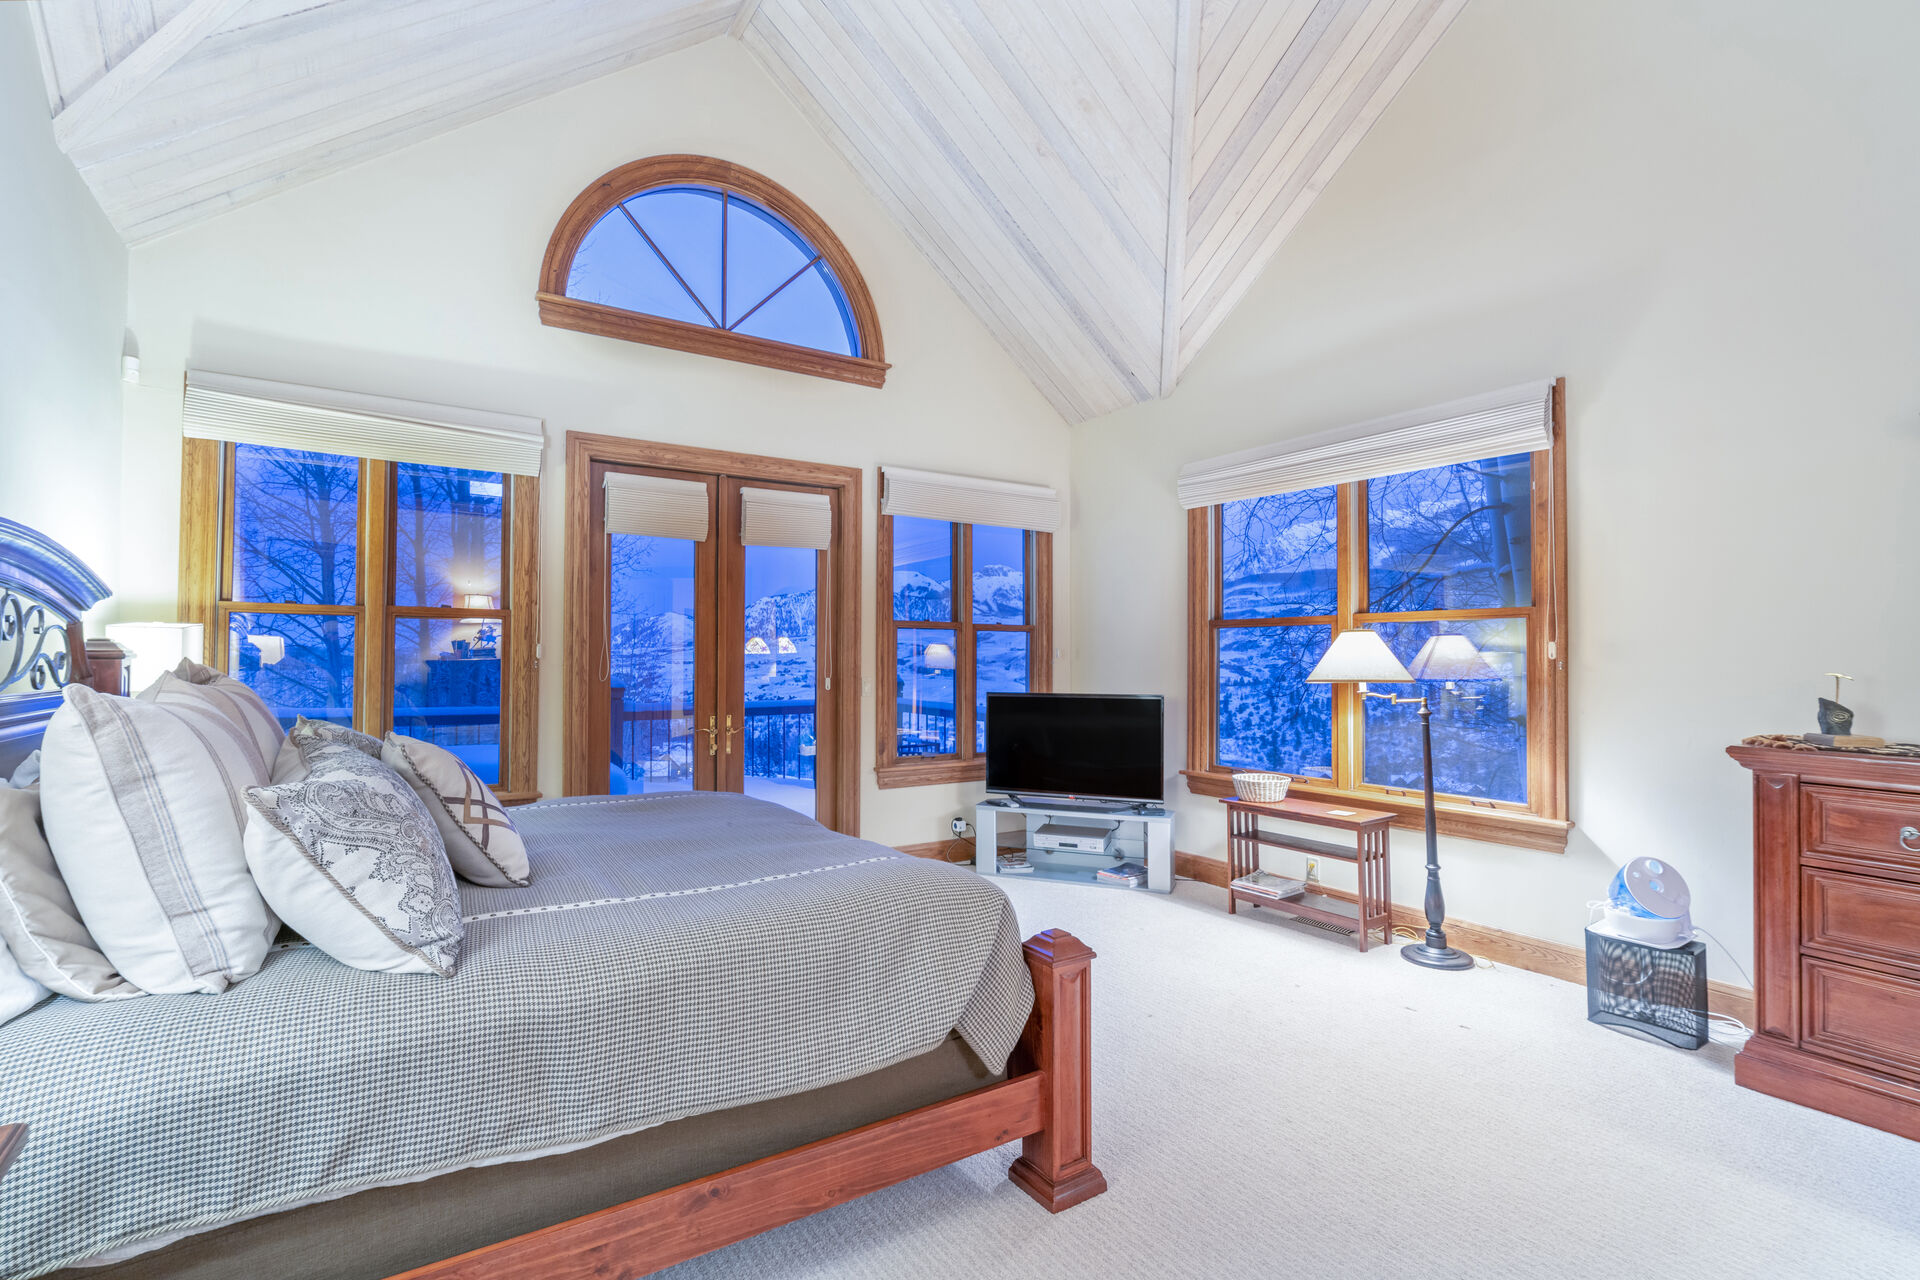 Master bedroom with ample floor space, flat-screen TV, and large bed, all surrounded by large windows.